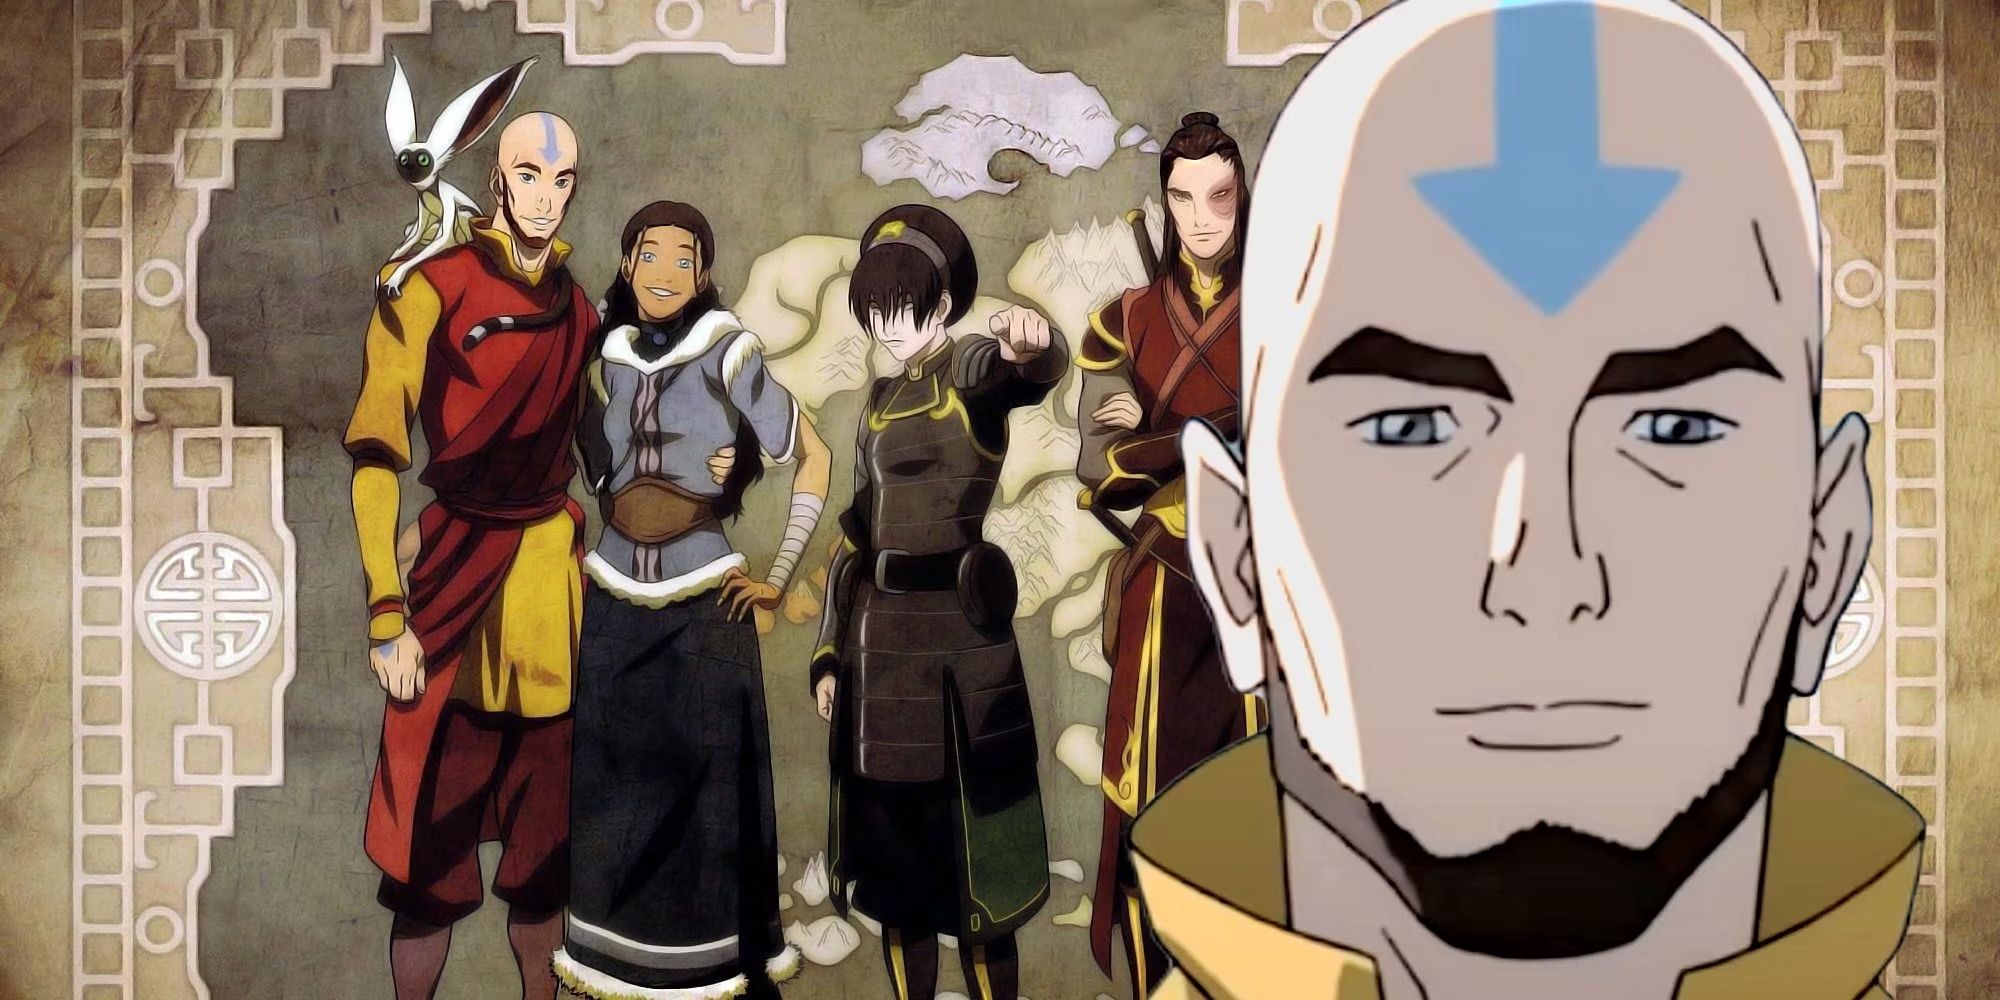 A composite image of adult Aang looking on with the adult versions of Aang, Toph, Korra, and Zuko in the background